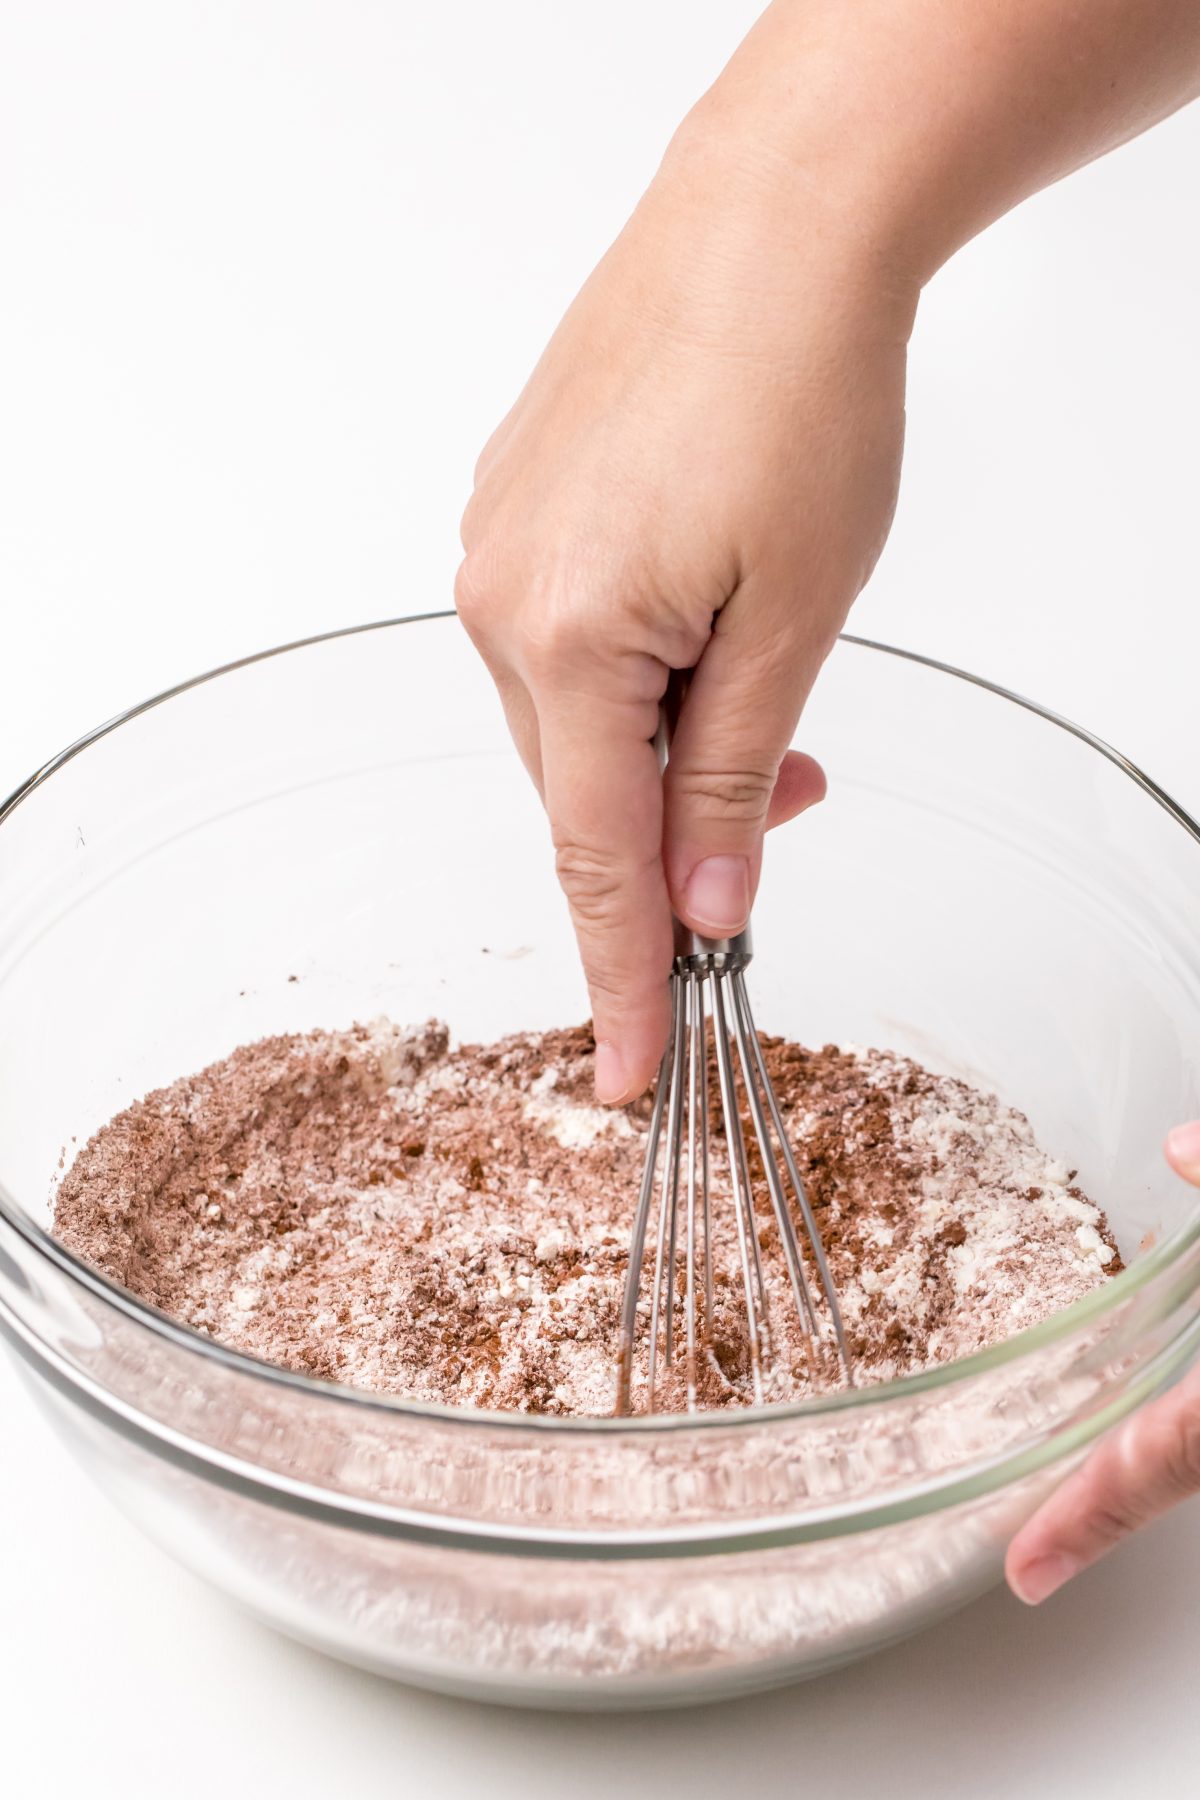 For the cake batter, gather sugar, flour, cocoa powder and vanilla extract